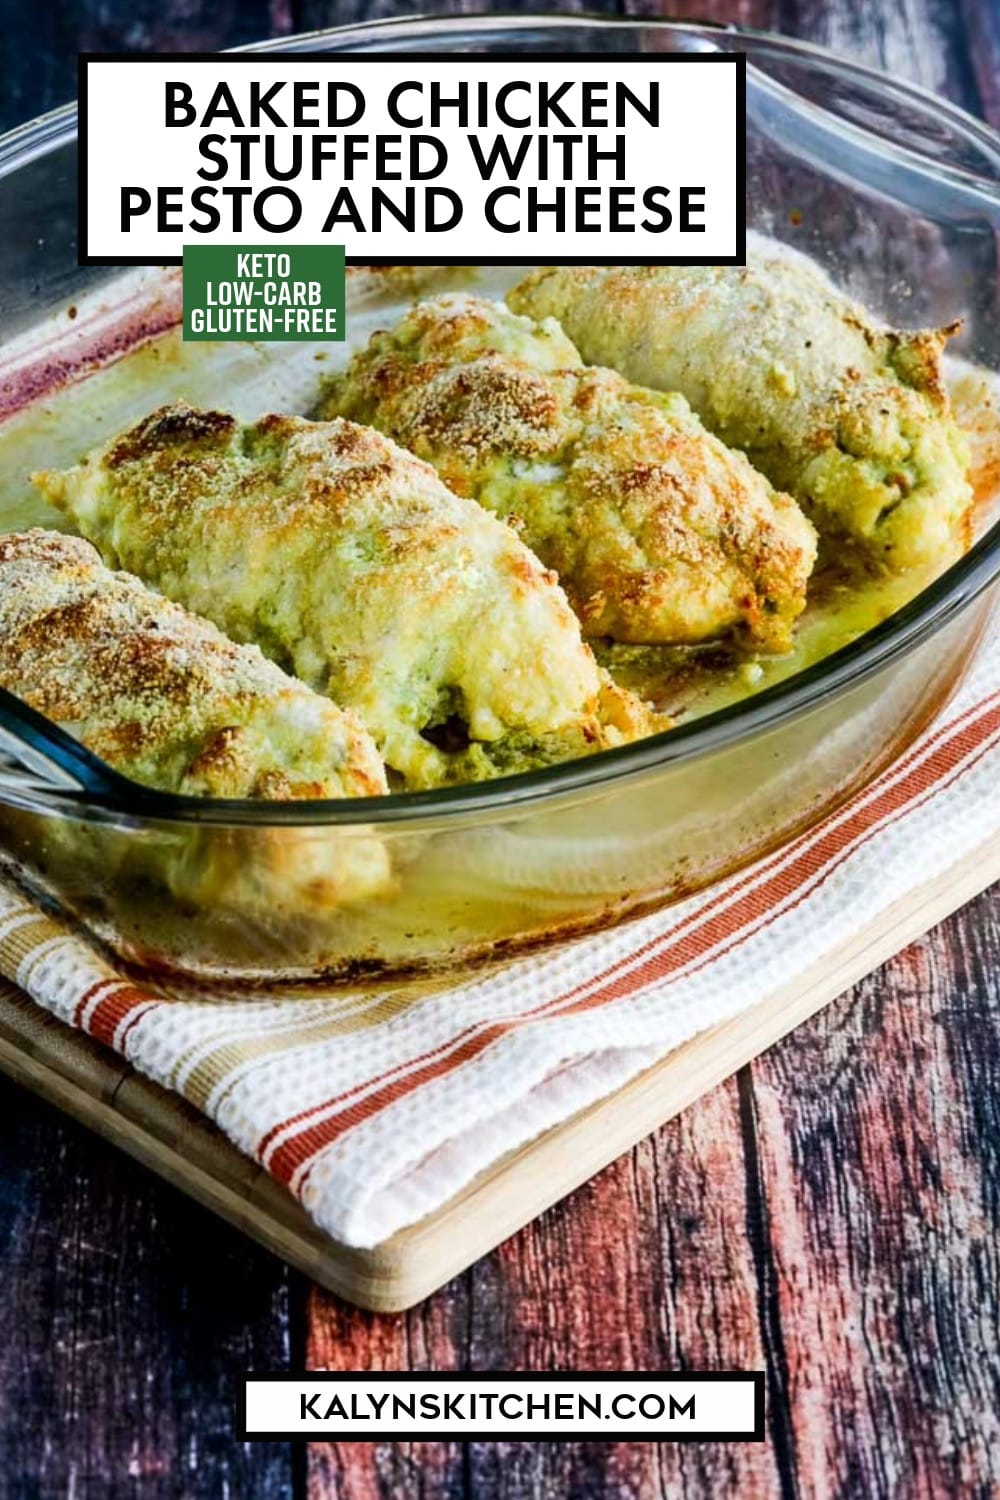 Pinterest image of Baked Chicken Stuffed with Pesto and Cheese